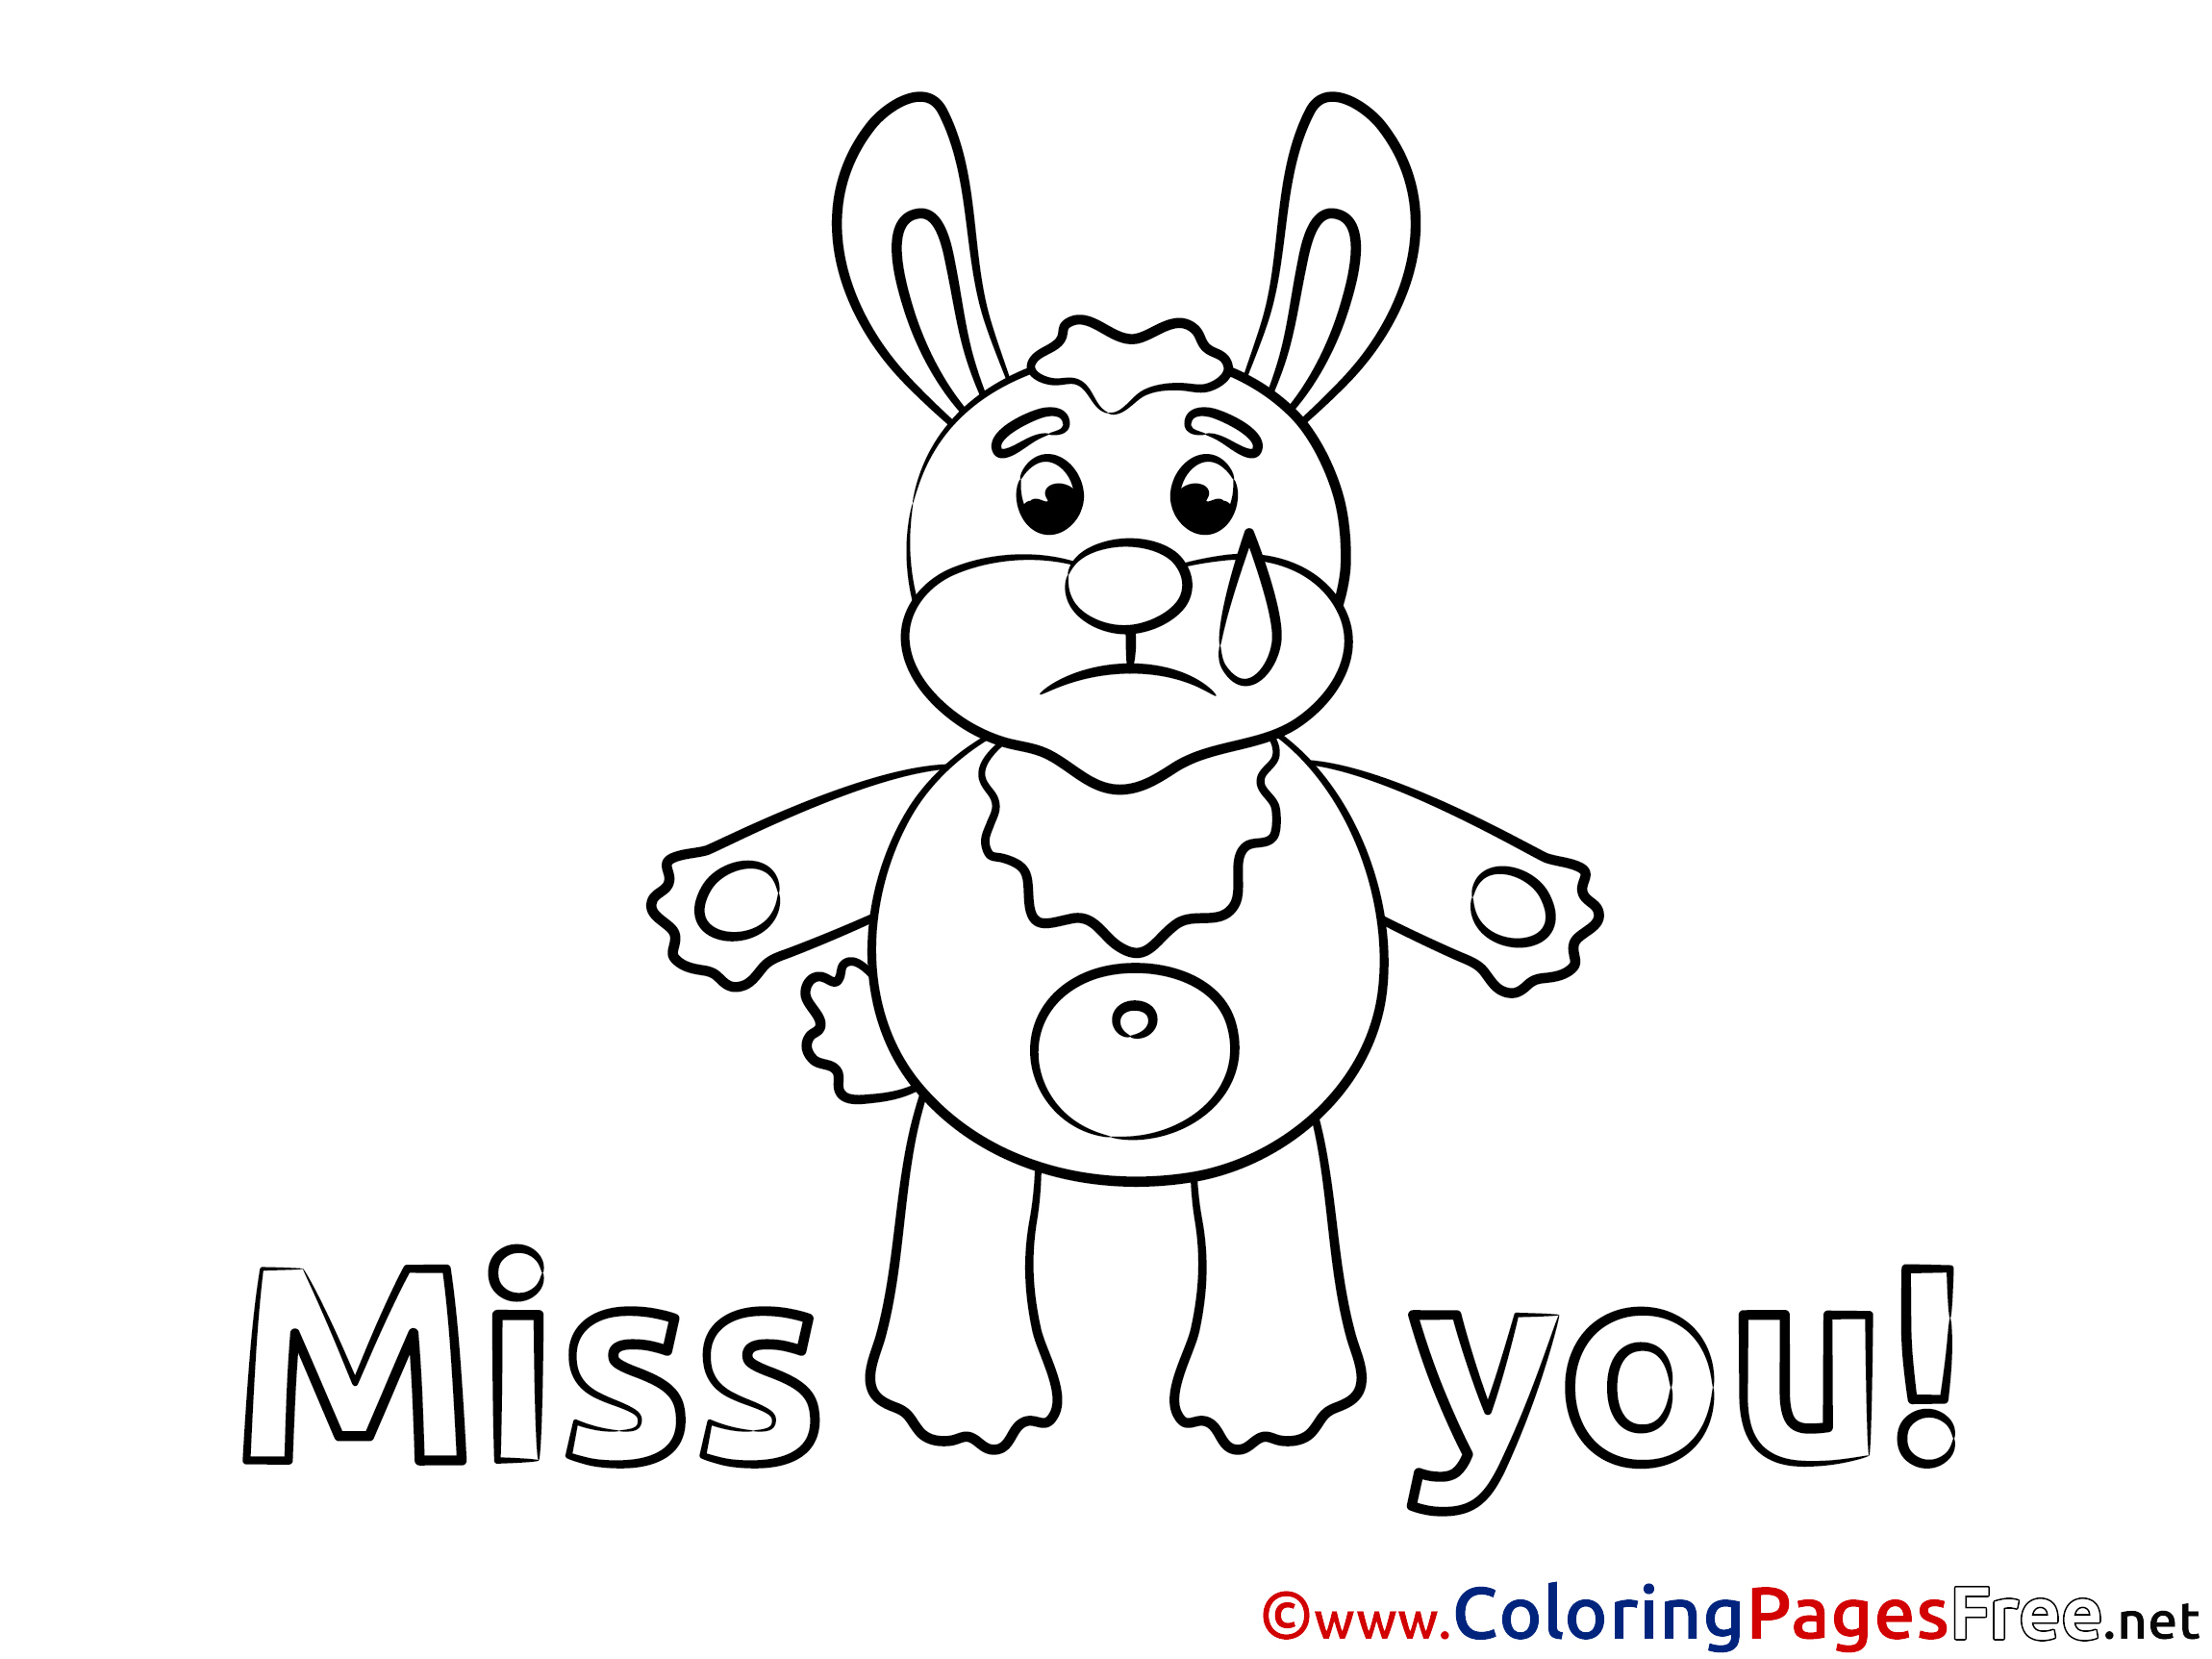 ill miss you coloring pages - photo #16